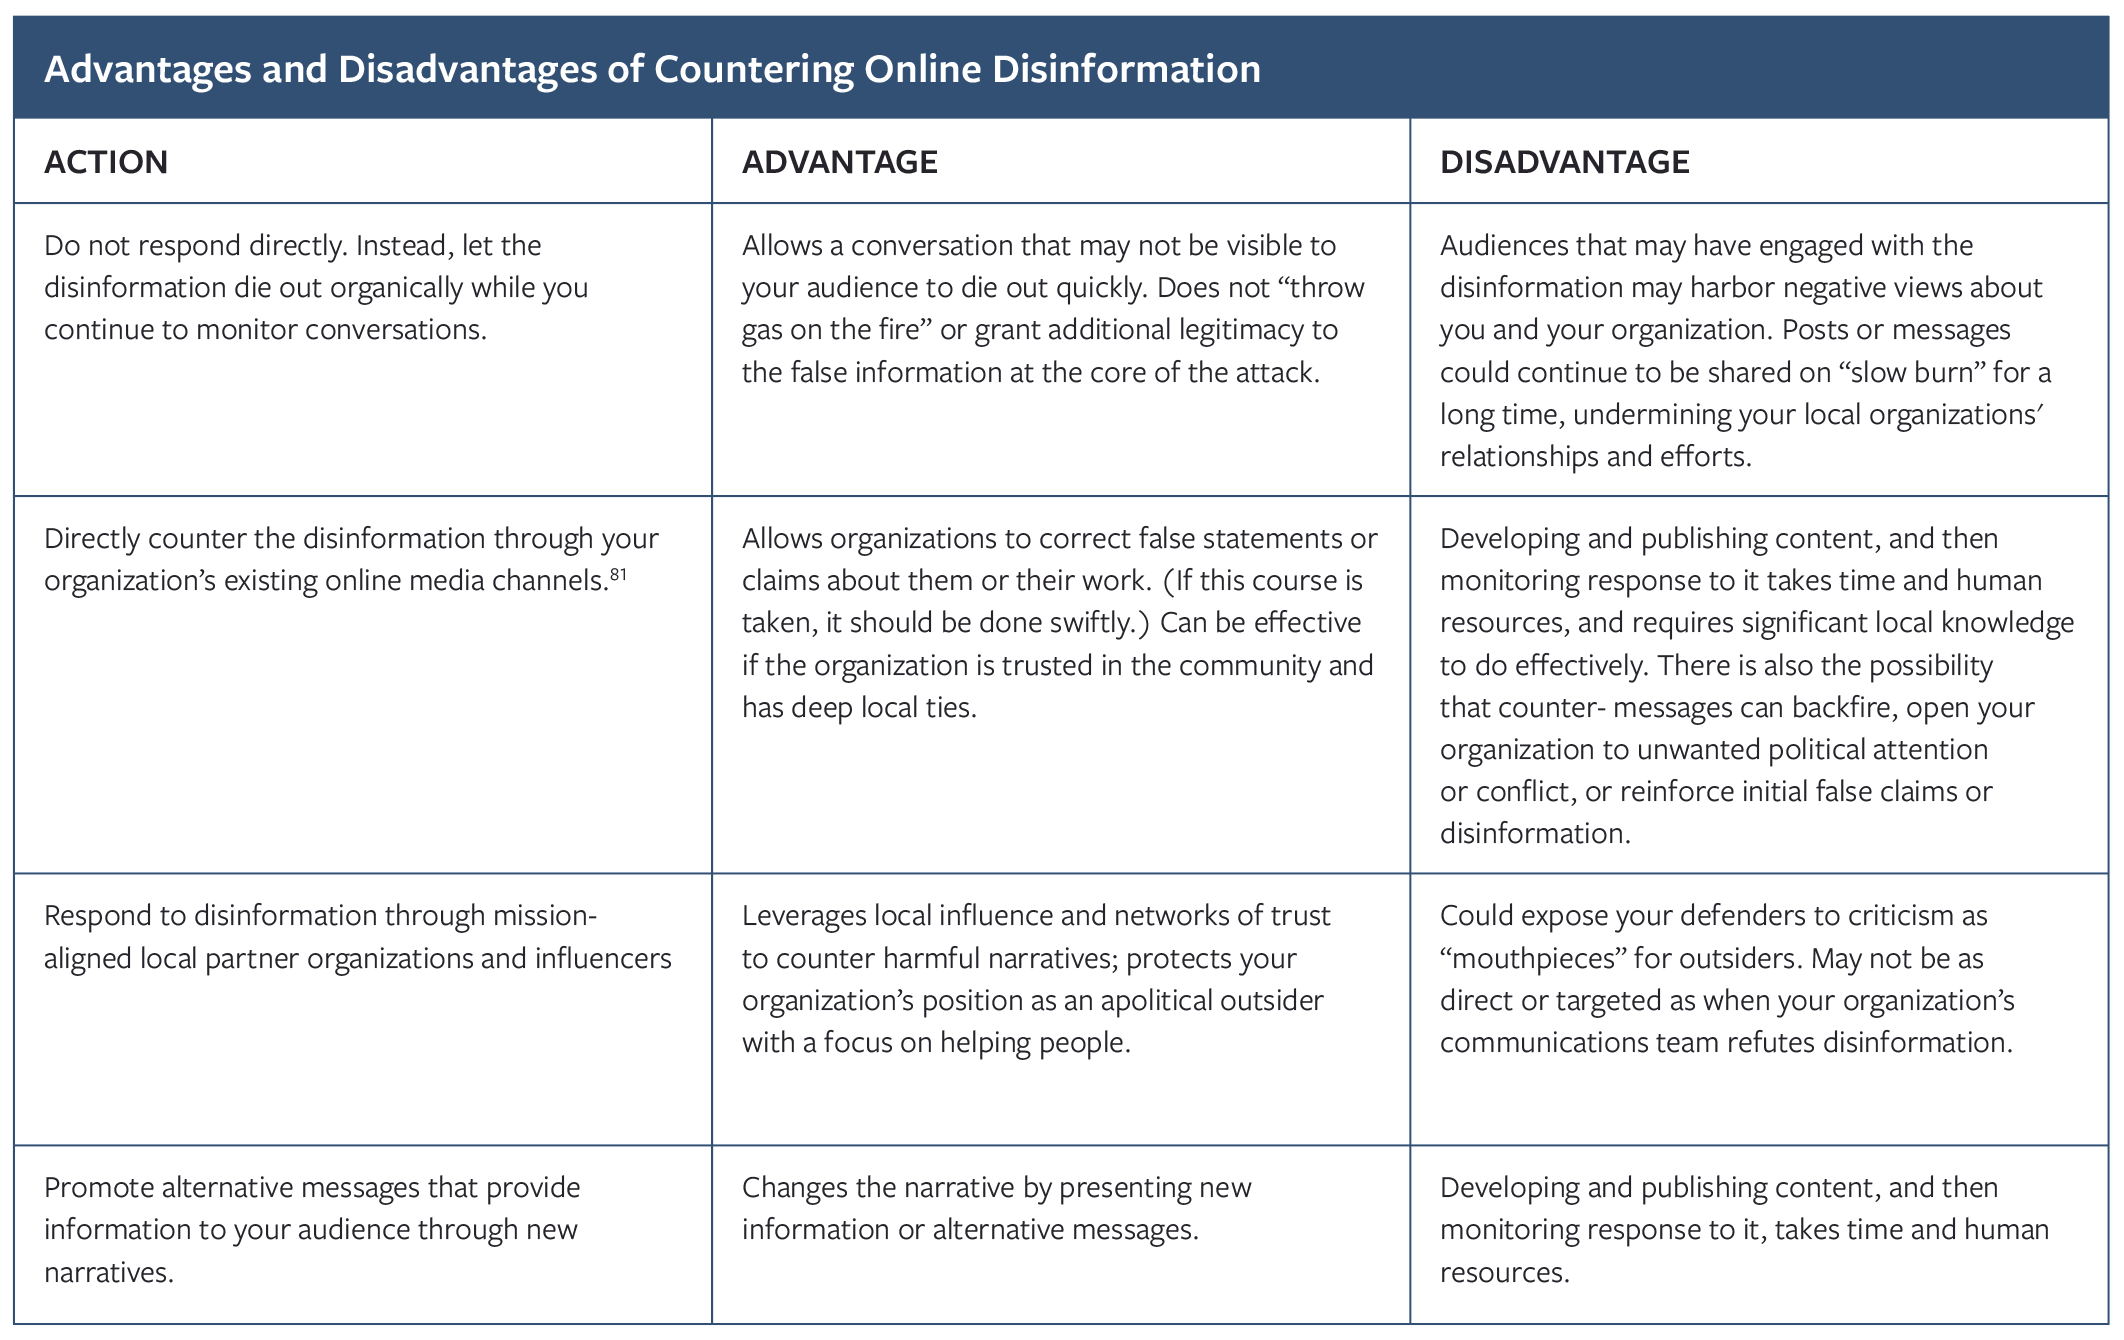 Table of advantages and disadvantages of countering online disinformation